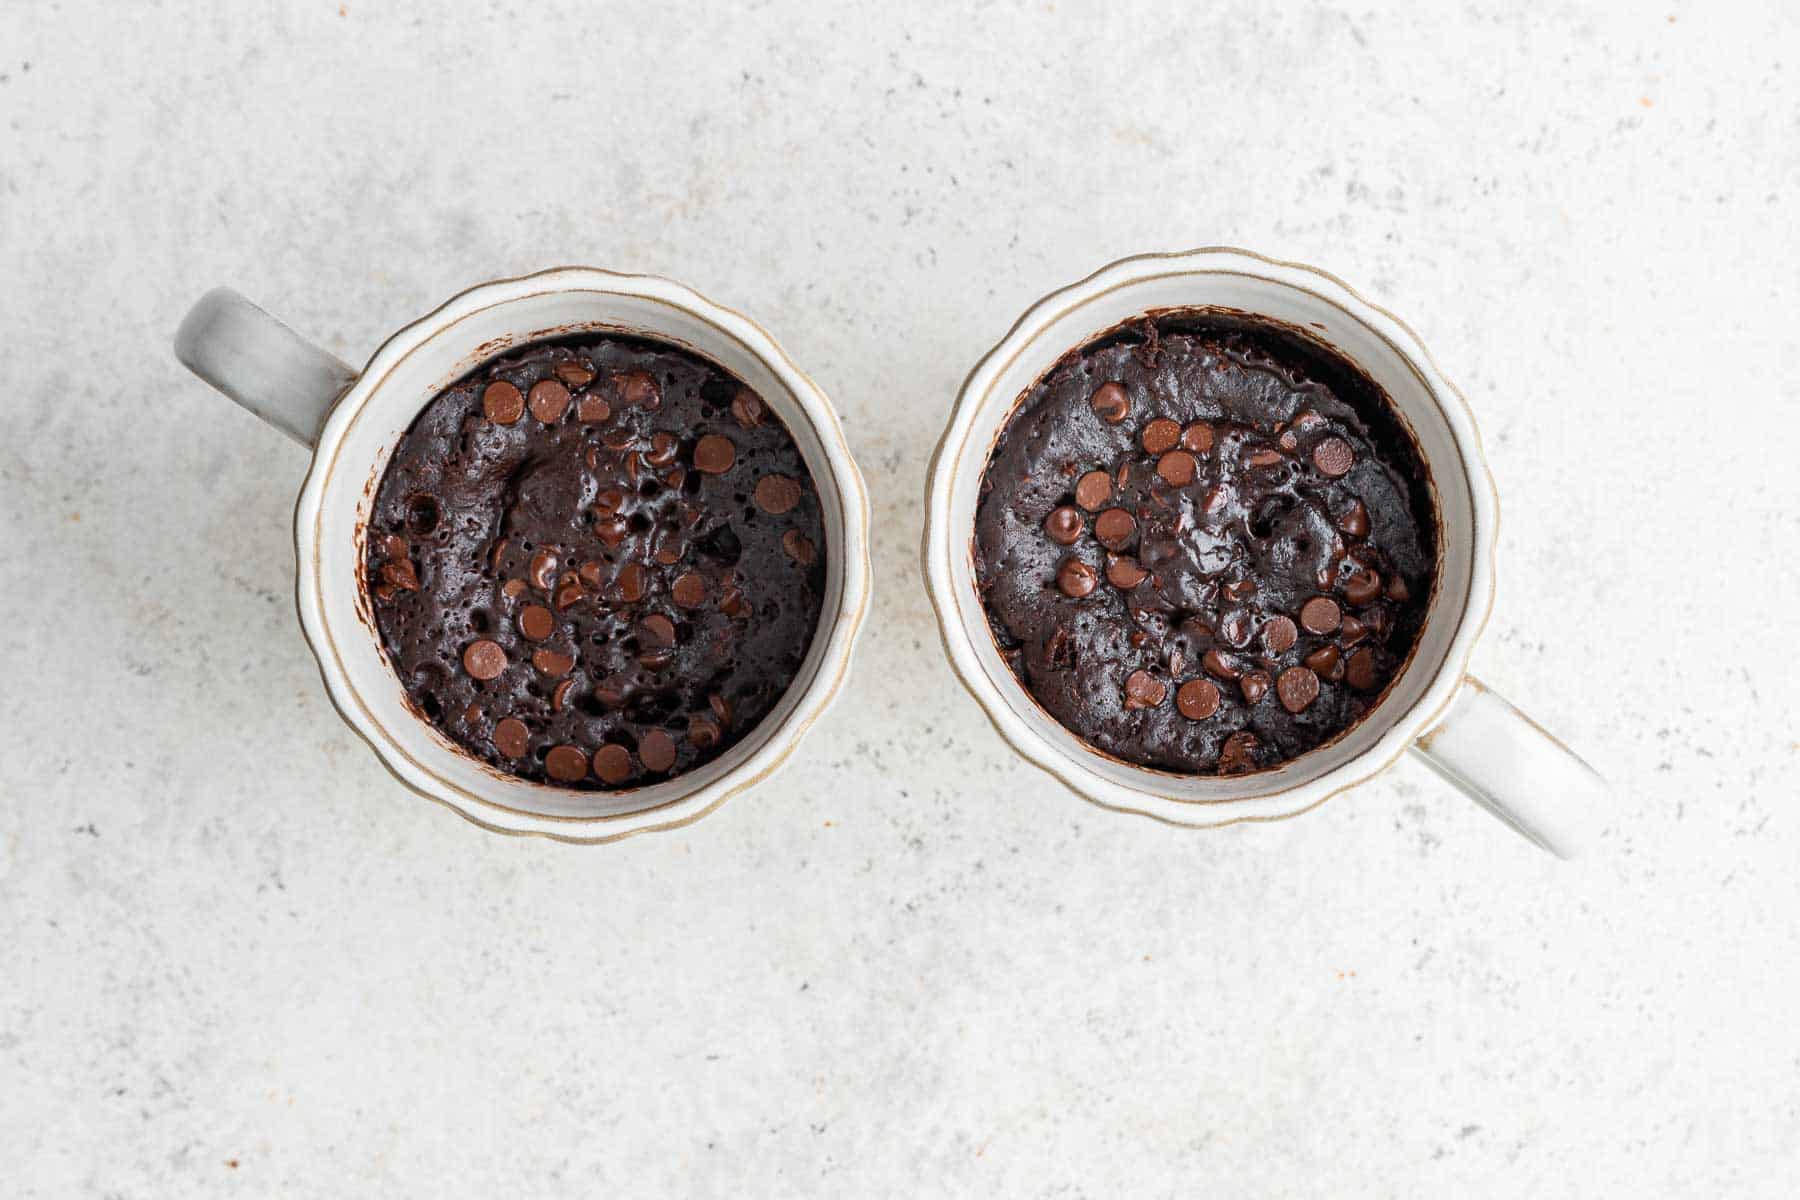 Chocolate mug cakes right out of the microwave in 2 mugs.